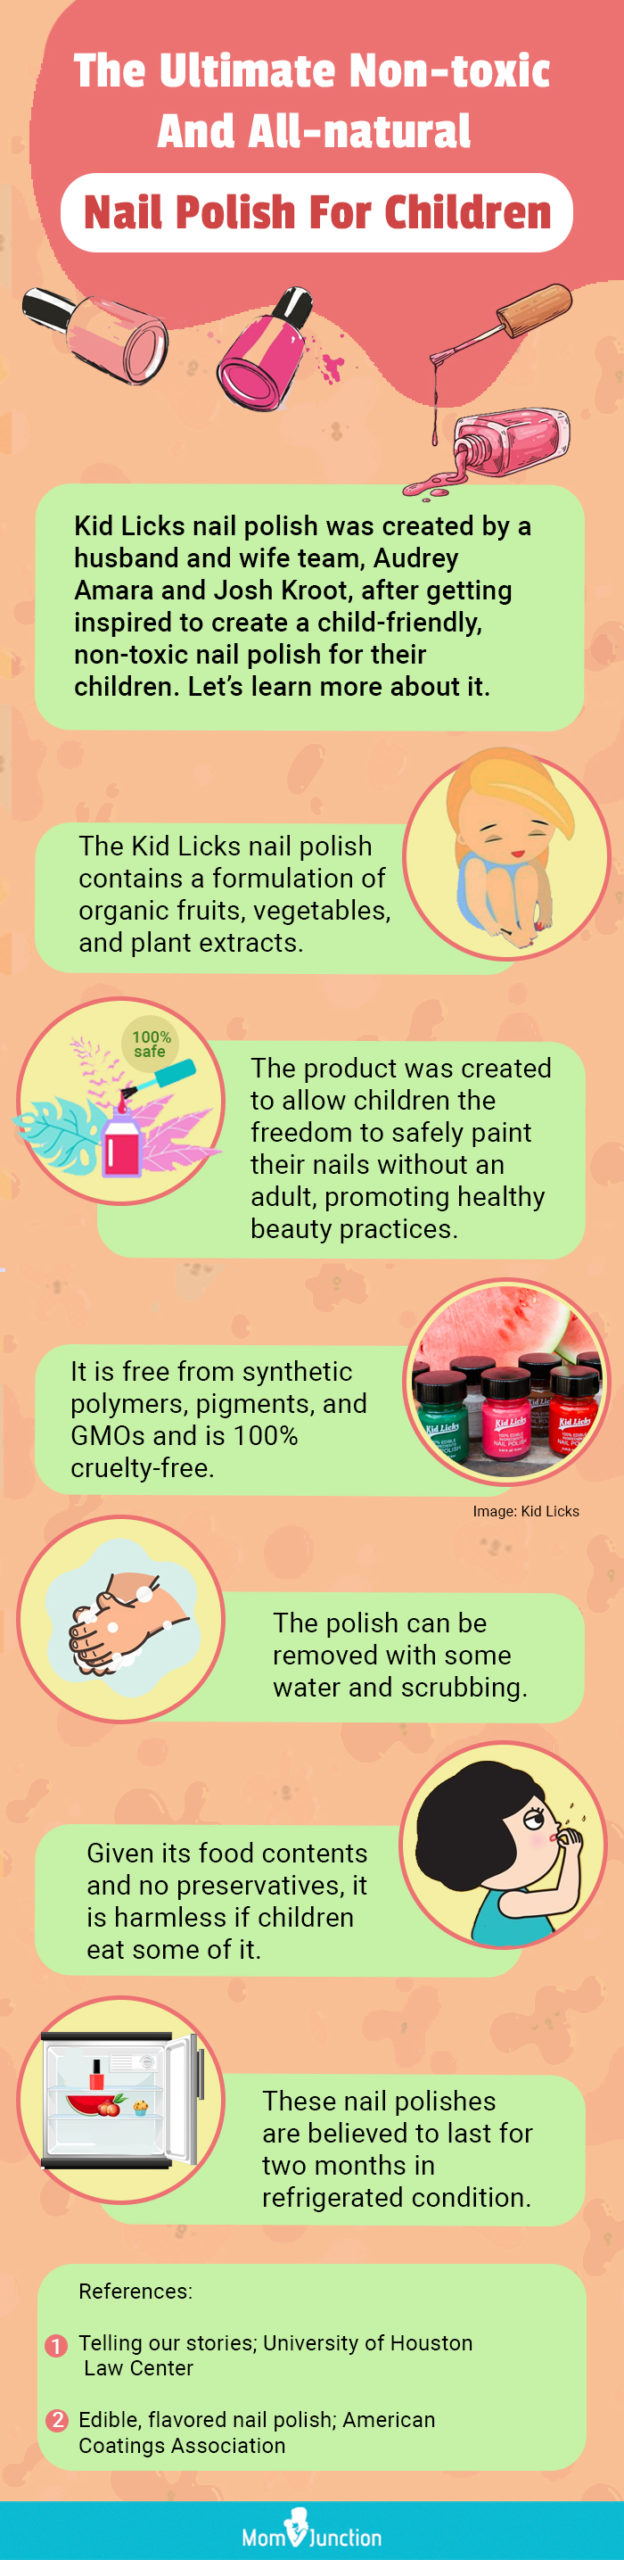 non toxic and all natural nail polish for children (infographic)